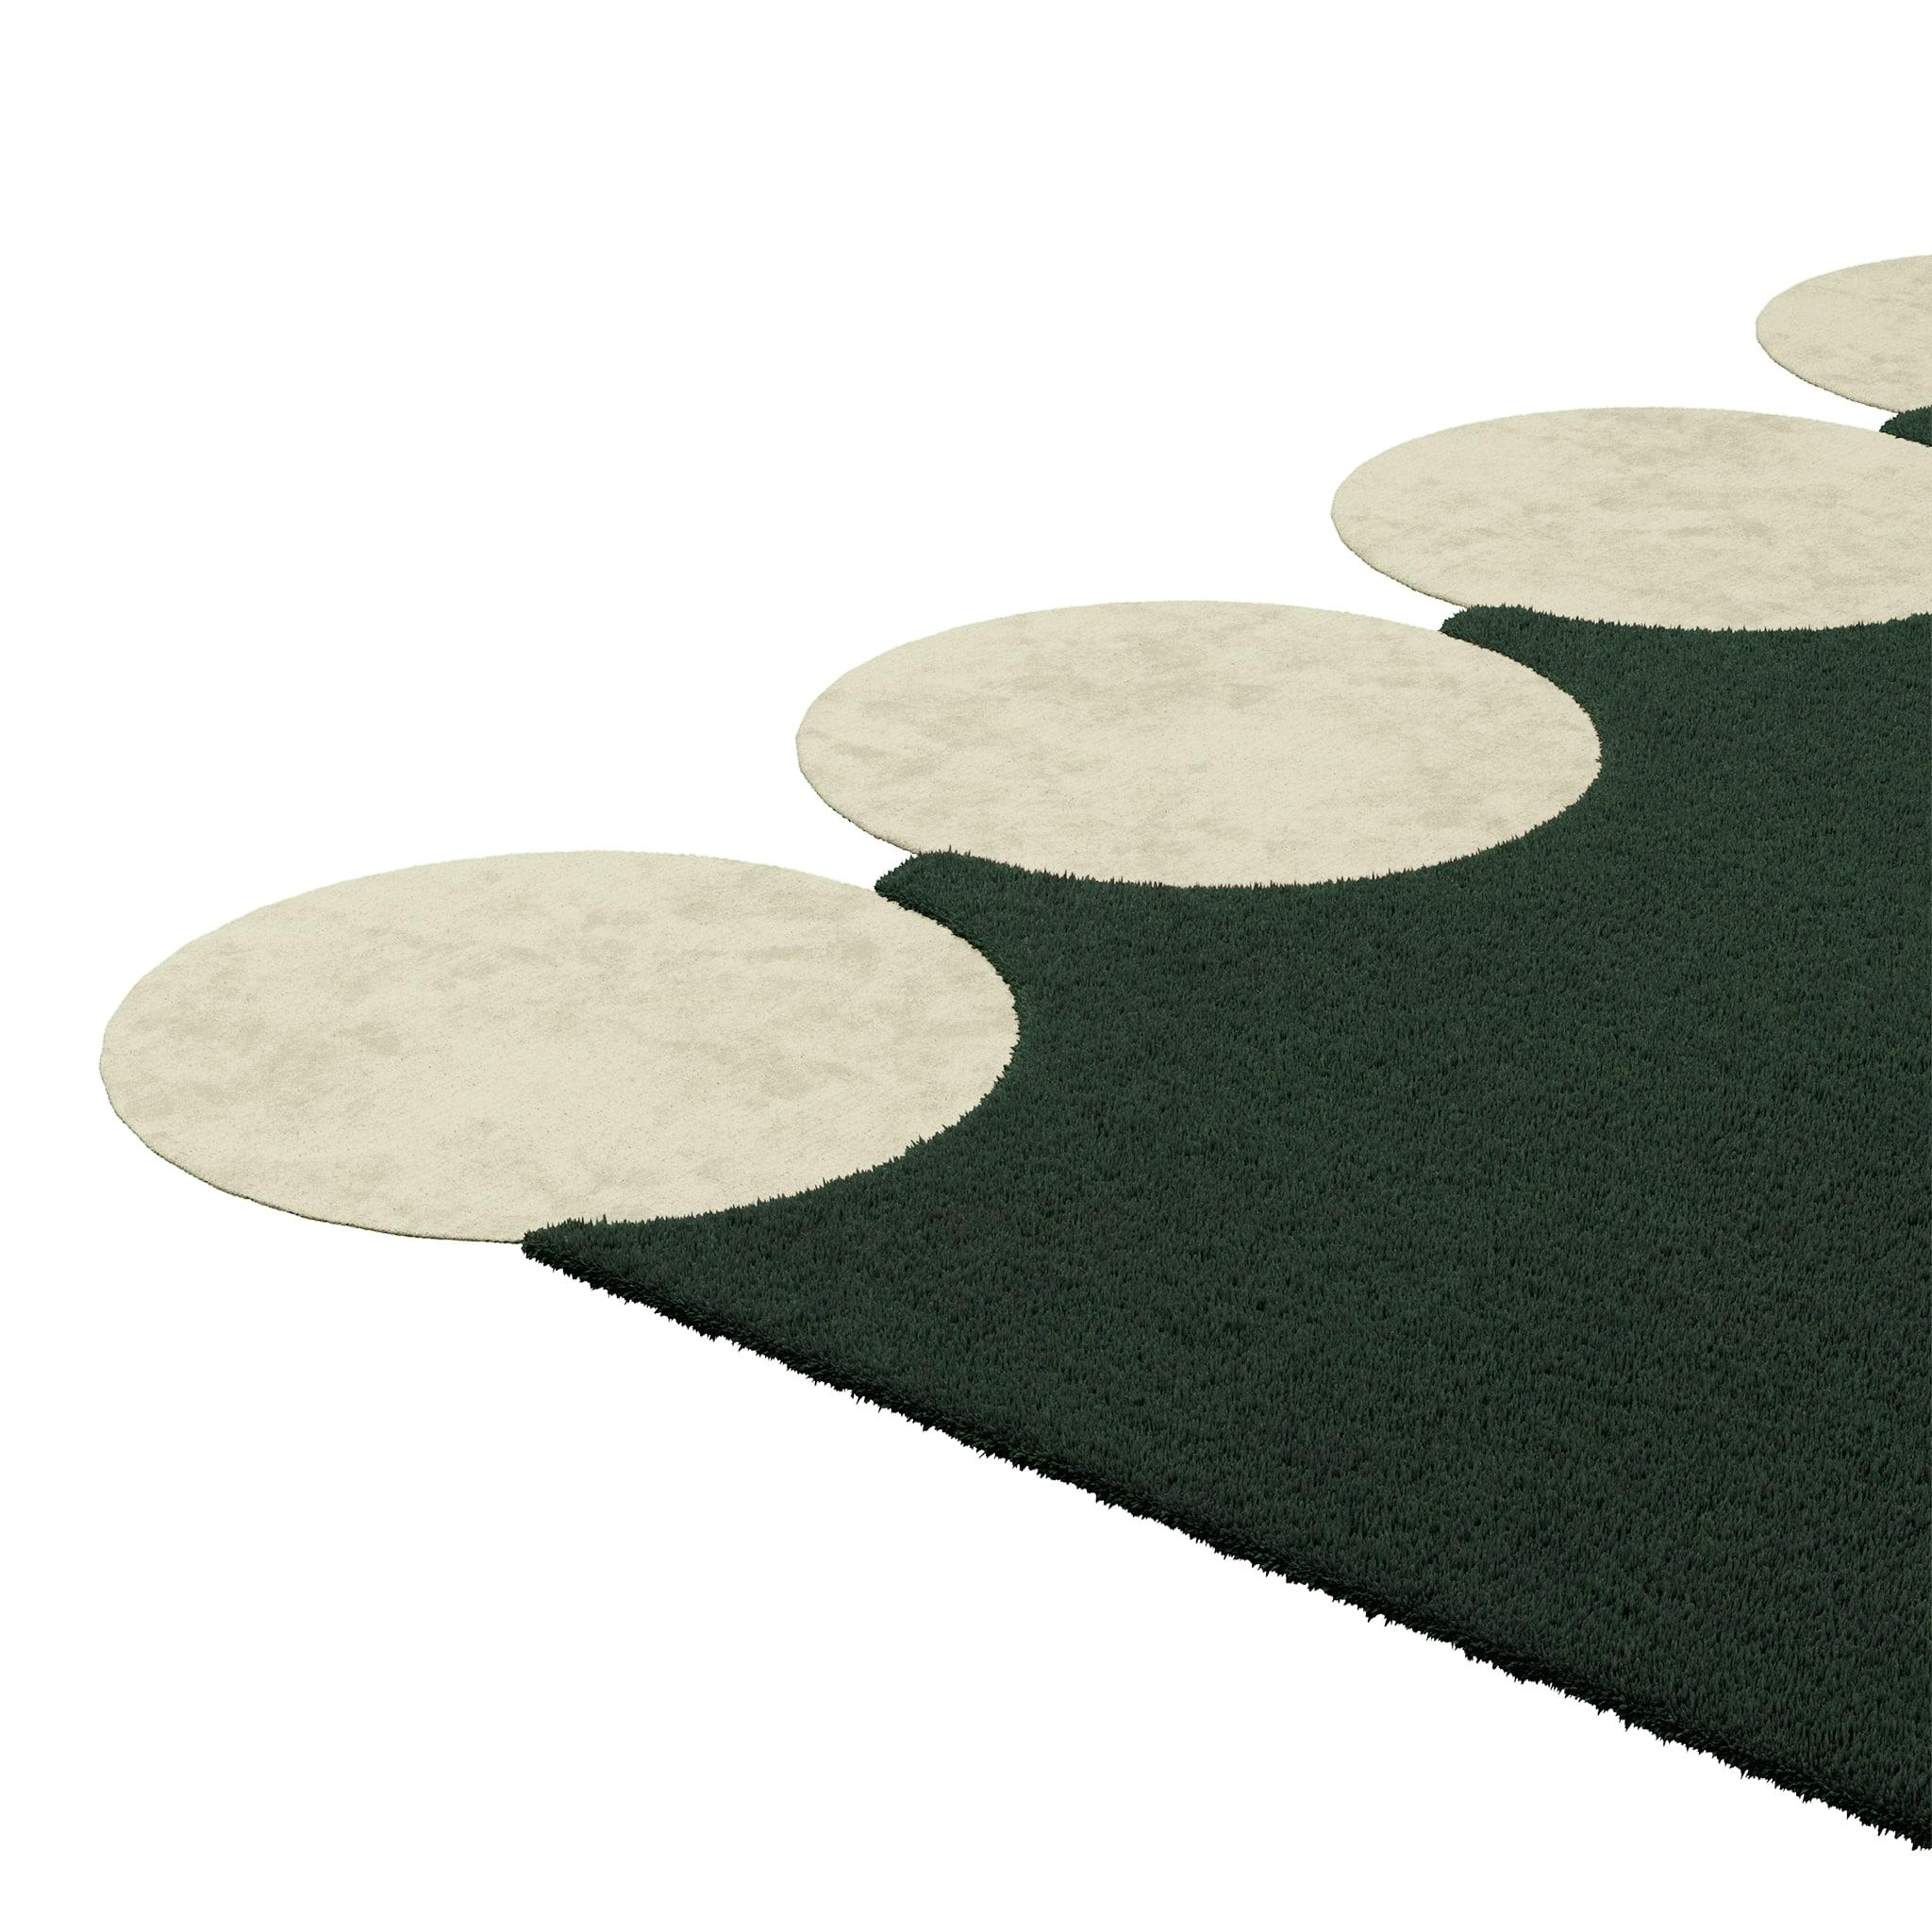 Tapis Shaped #047 is a Memphis Design style rug in murky green and off-white, a classic yet sophisticated color combination.
With a rectangular shape and three small circles on each edge, this Memphis Design style is a design masterpiece that makes